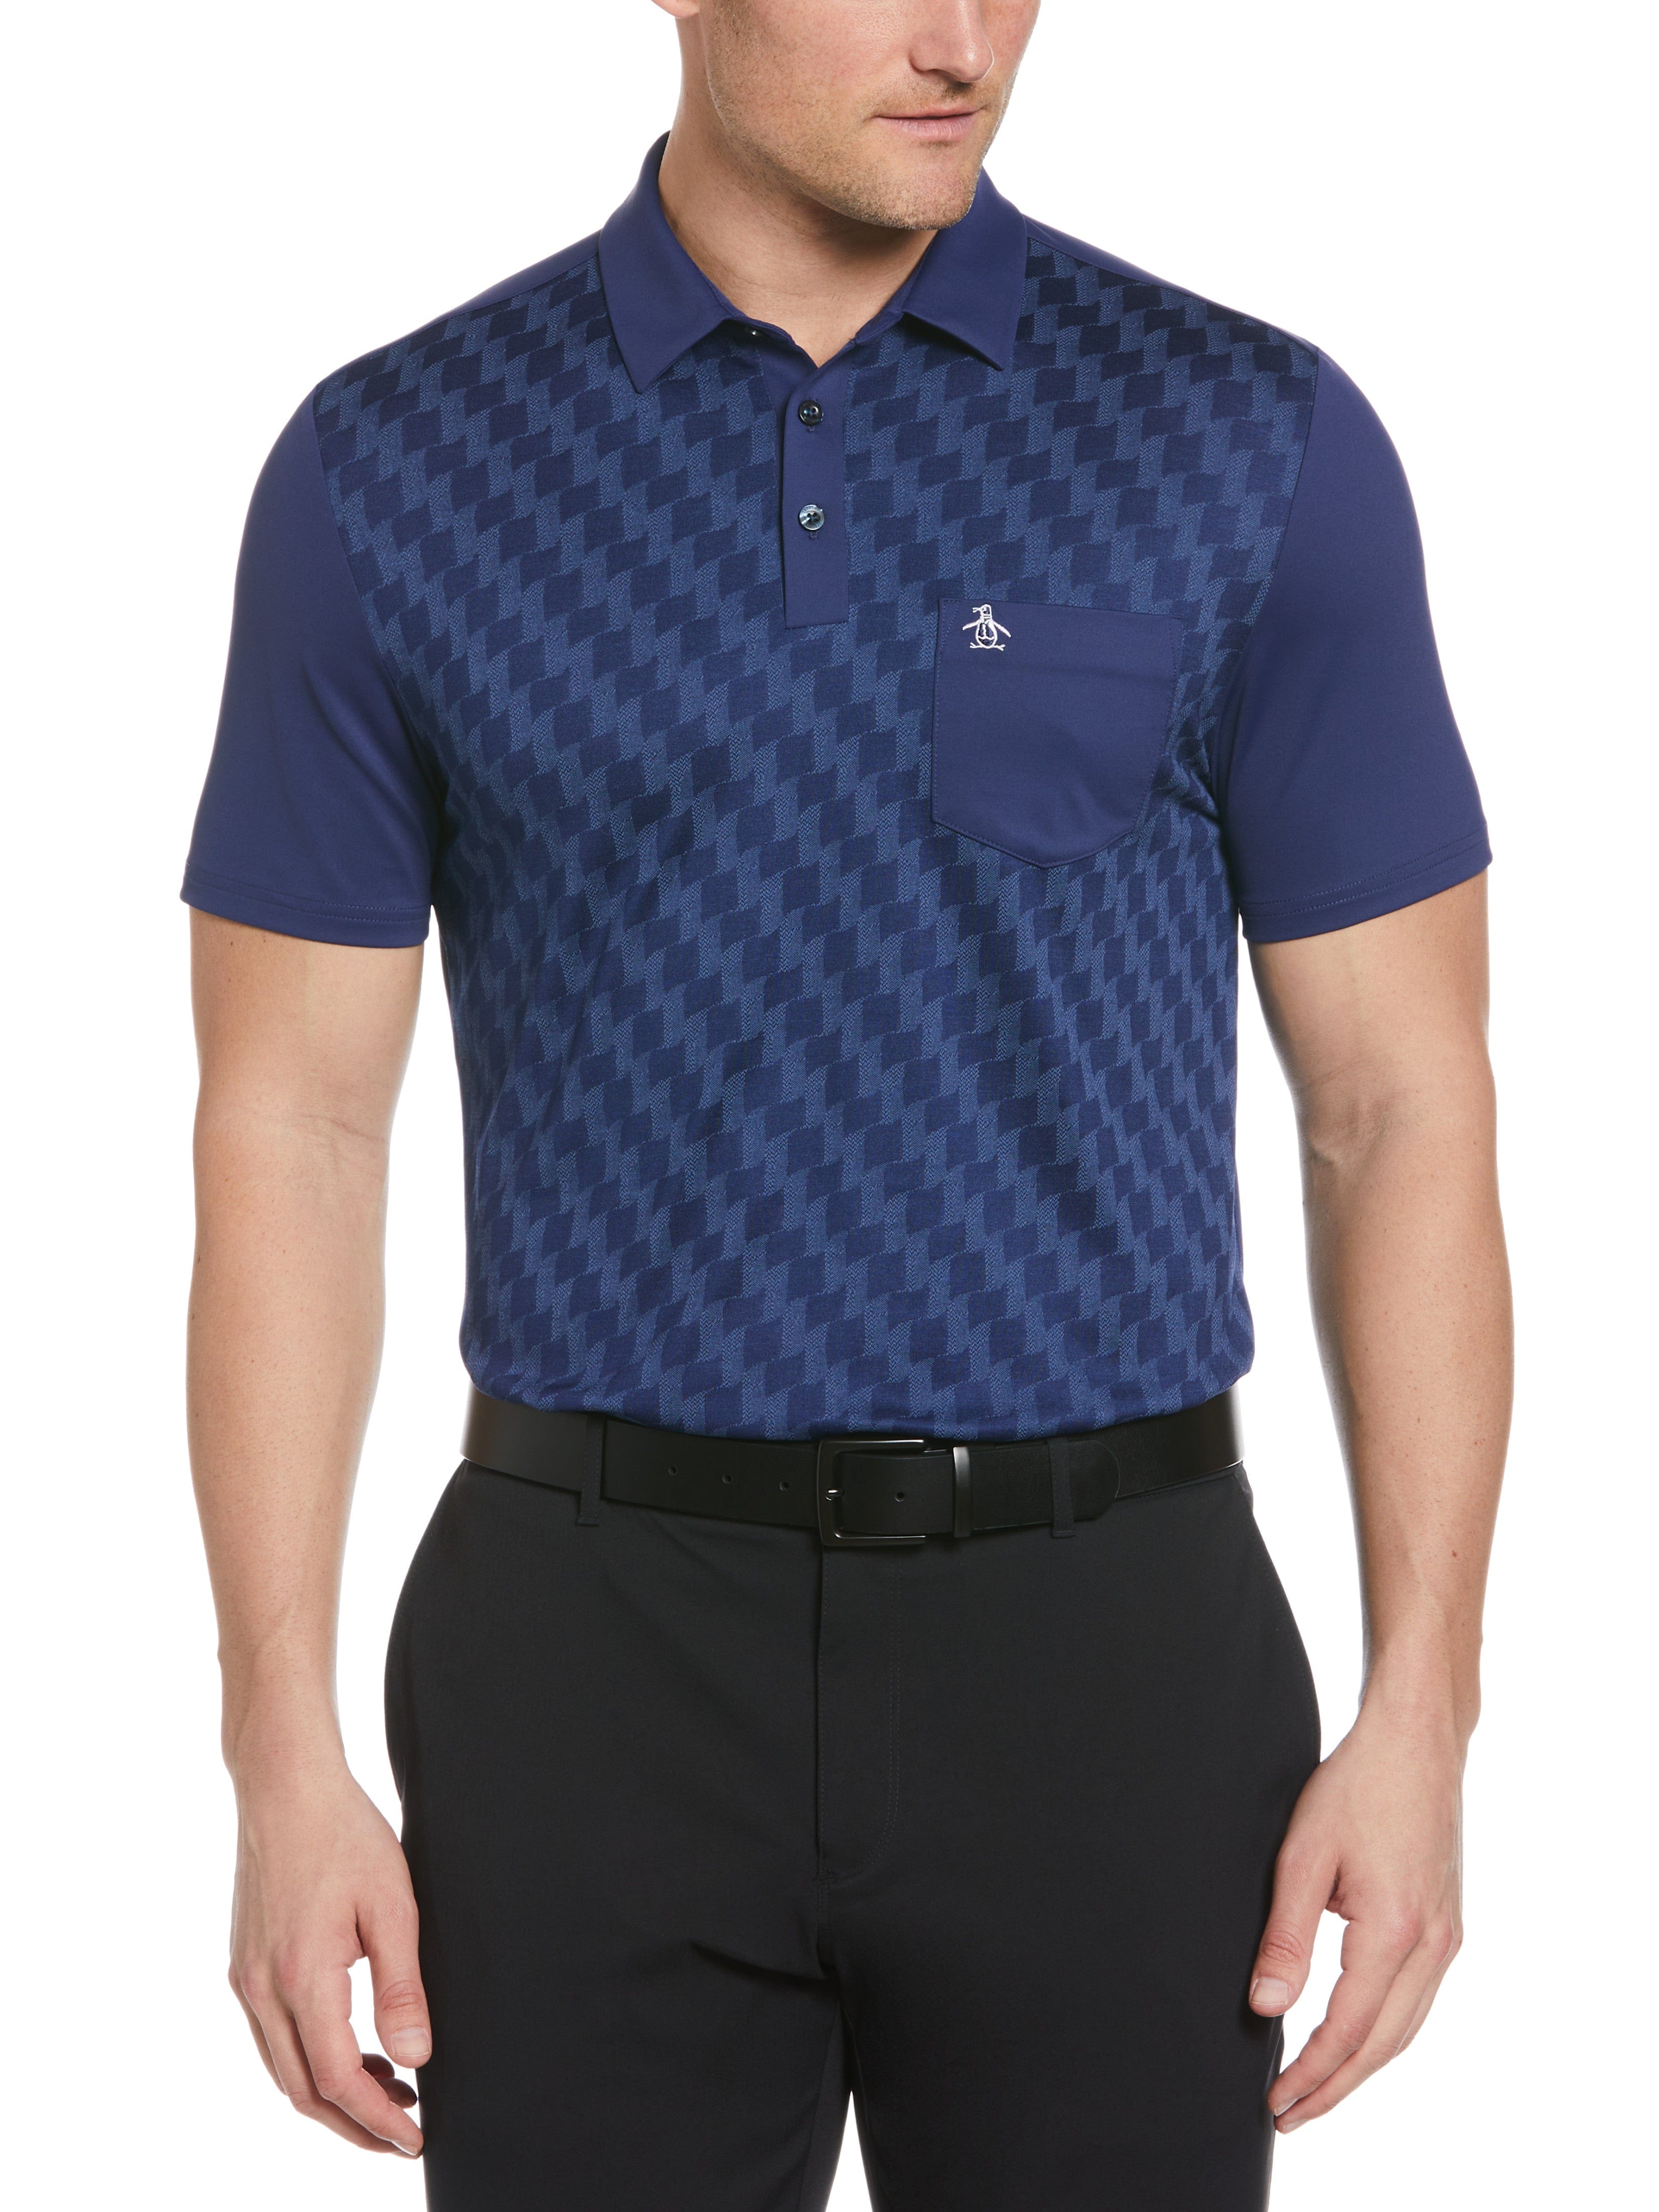 Original Penguin Mens 50s Color Block Print Golf Polo Shirt, Size Medium, Astral Night Blue, Polyester/Recycled Polyester/Elastane